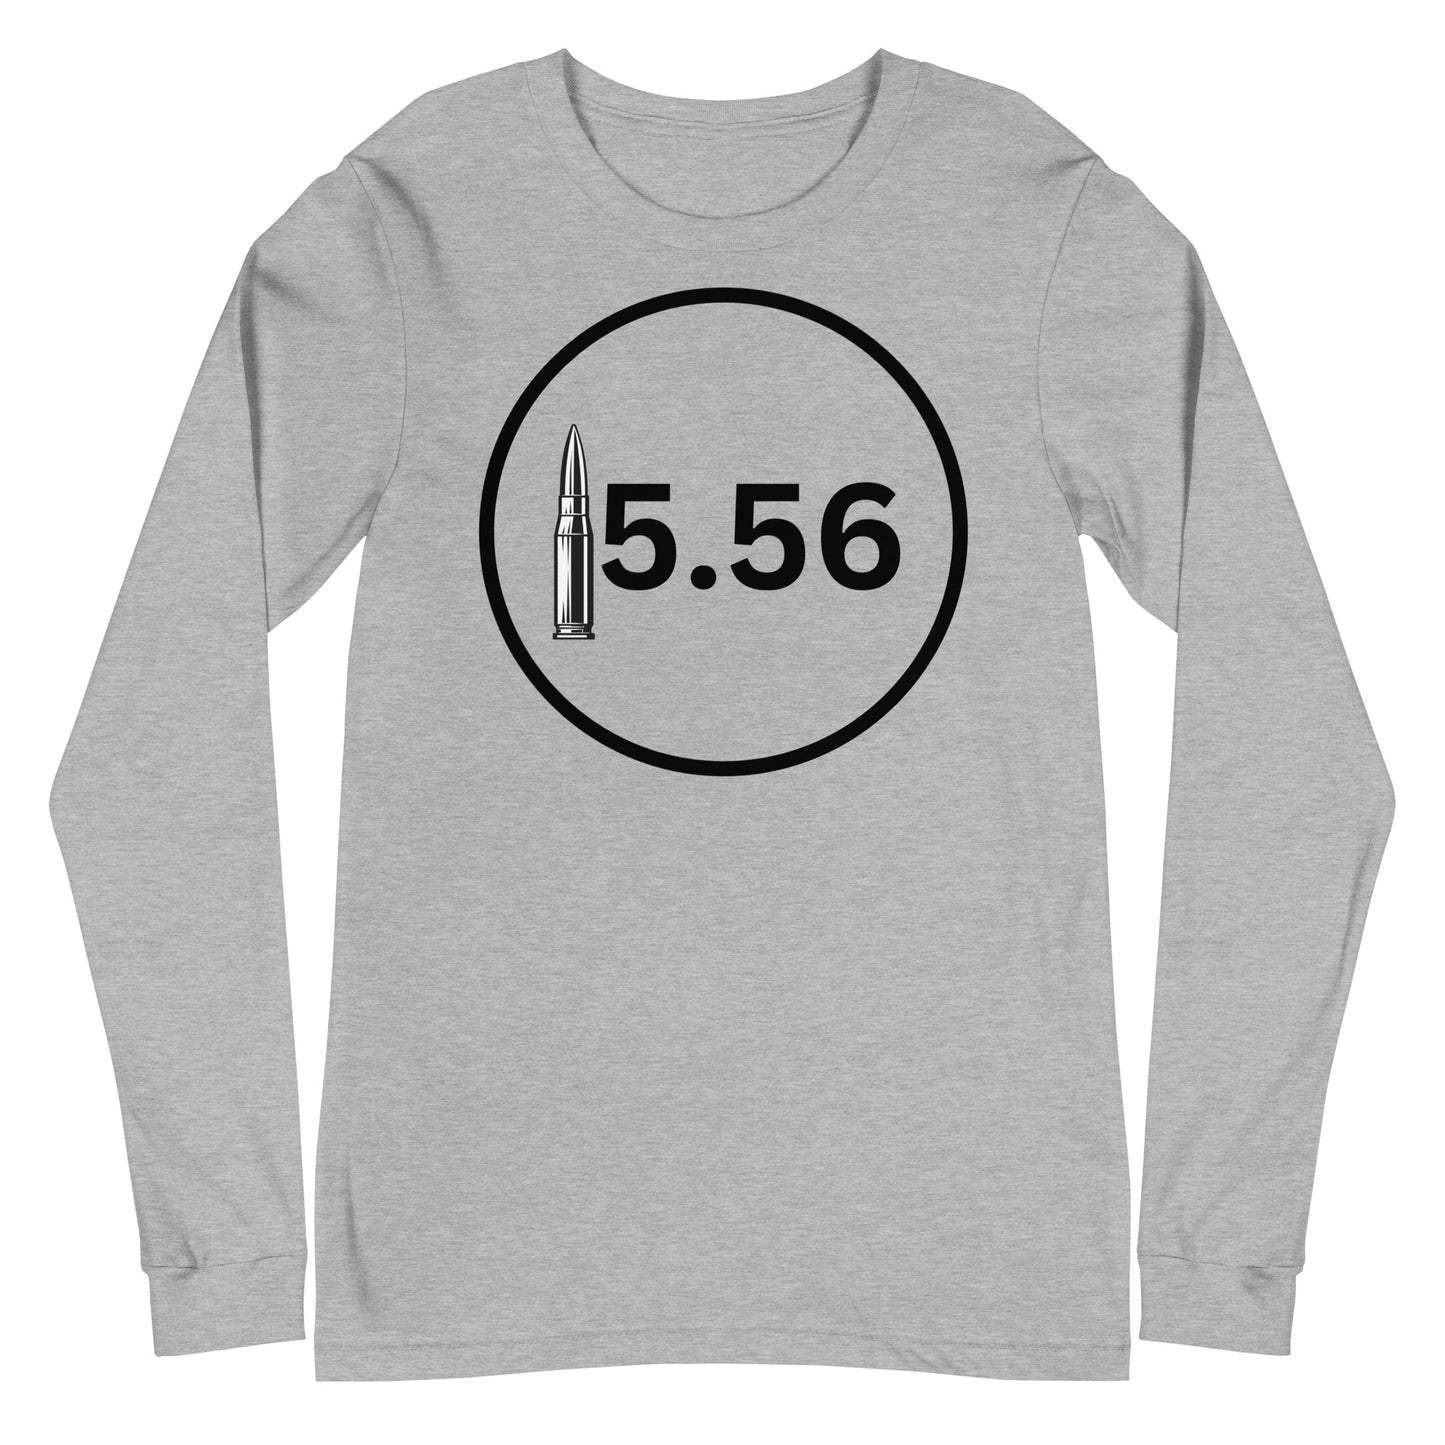 "Patriotic 5.56 Grey Long Sleeve T-shirt featuring the caliber '5.56' and American flag design."